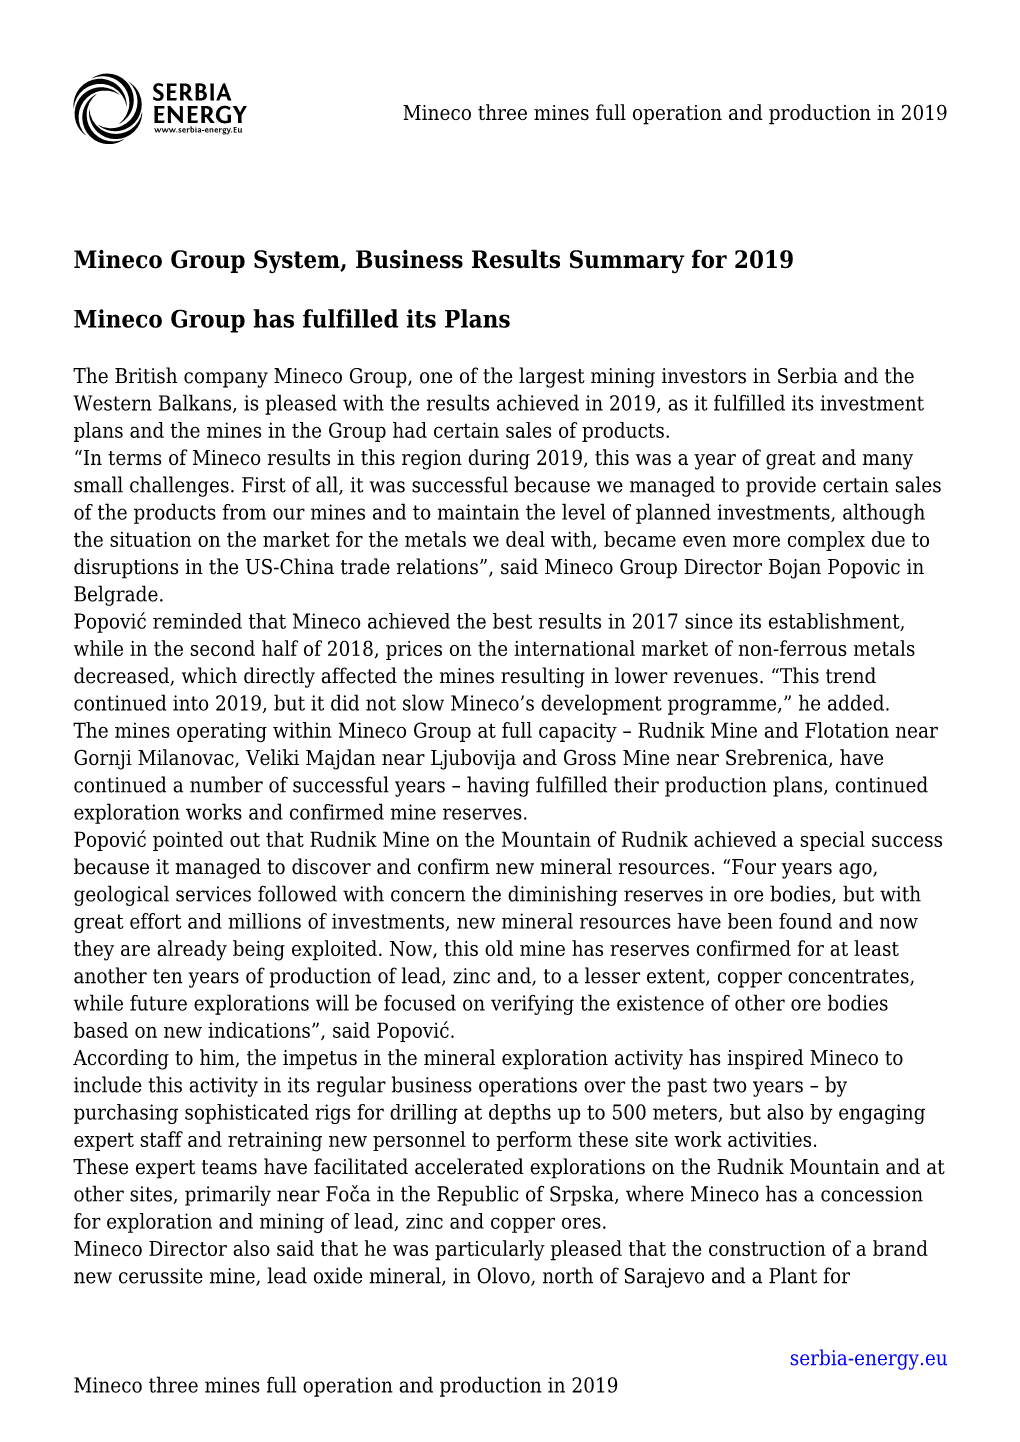 Mineco Three Mines Full Operation and Production in 2019